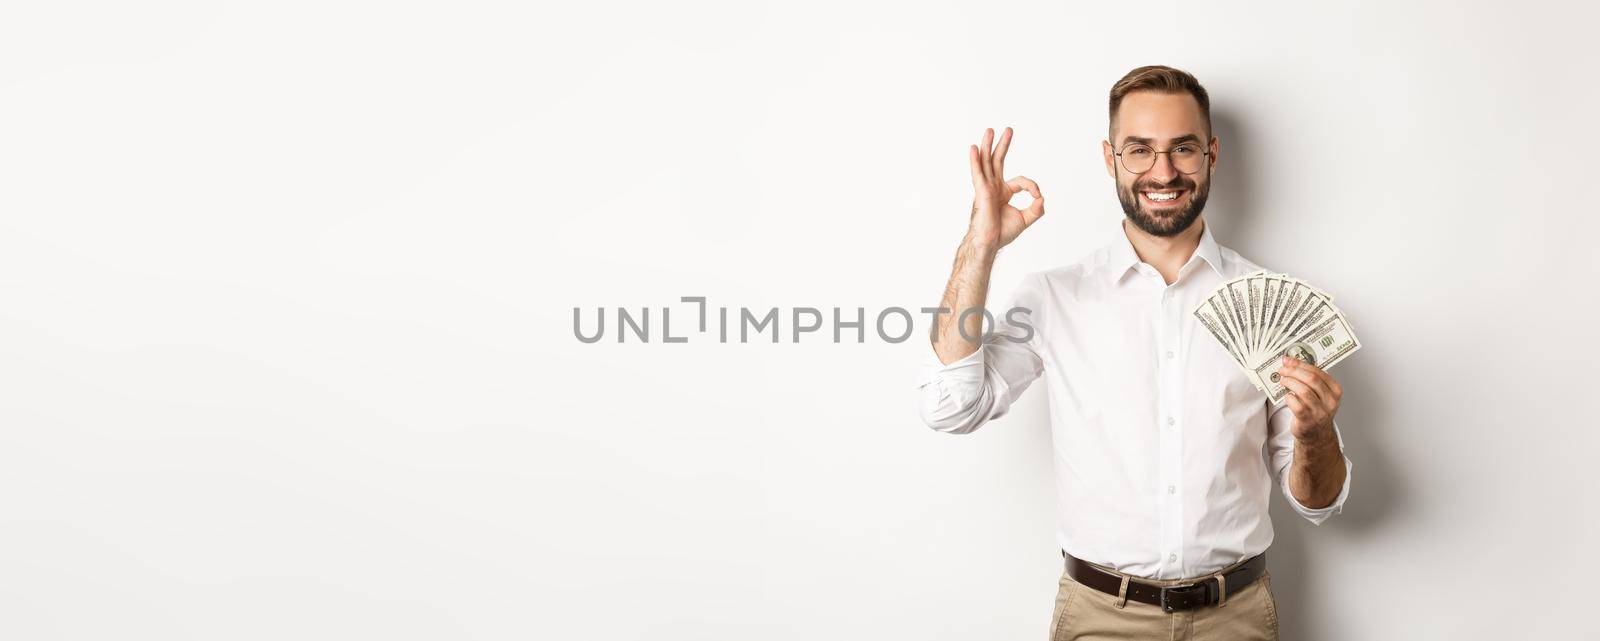 Satisfied young businessman showing money, make okay sign, earning cash, standing over white background.